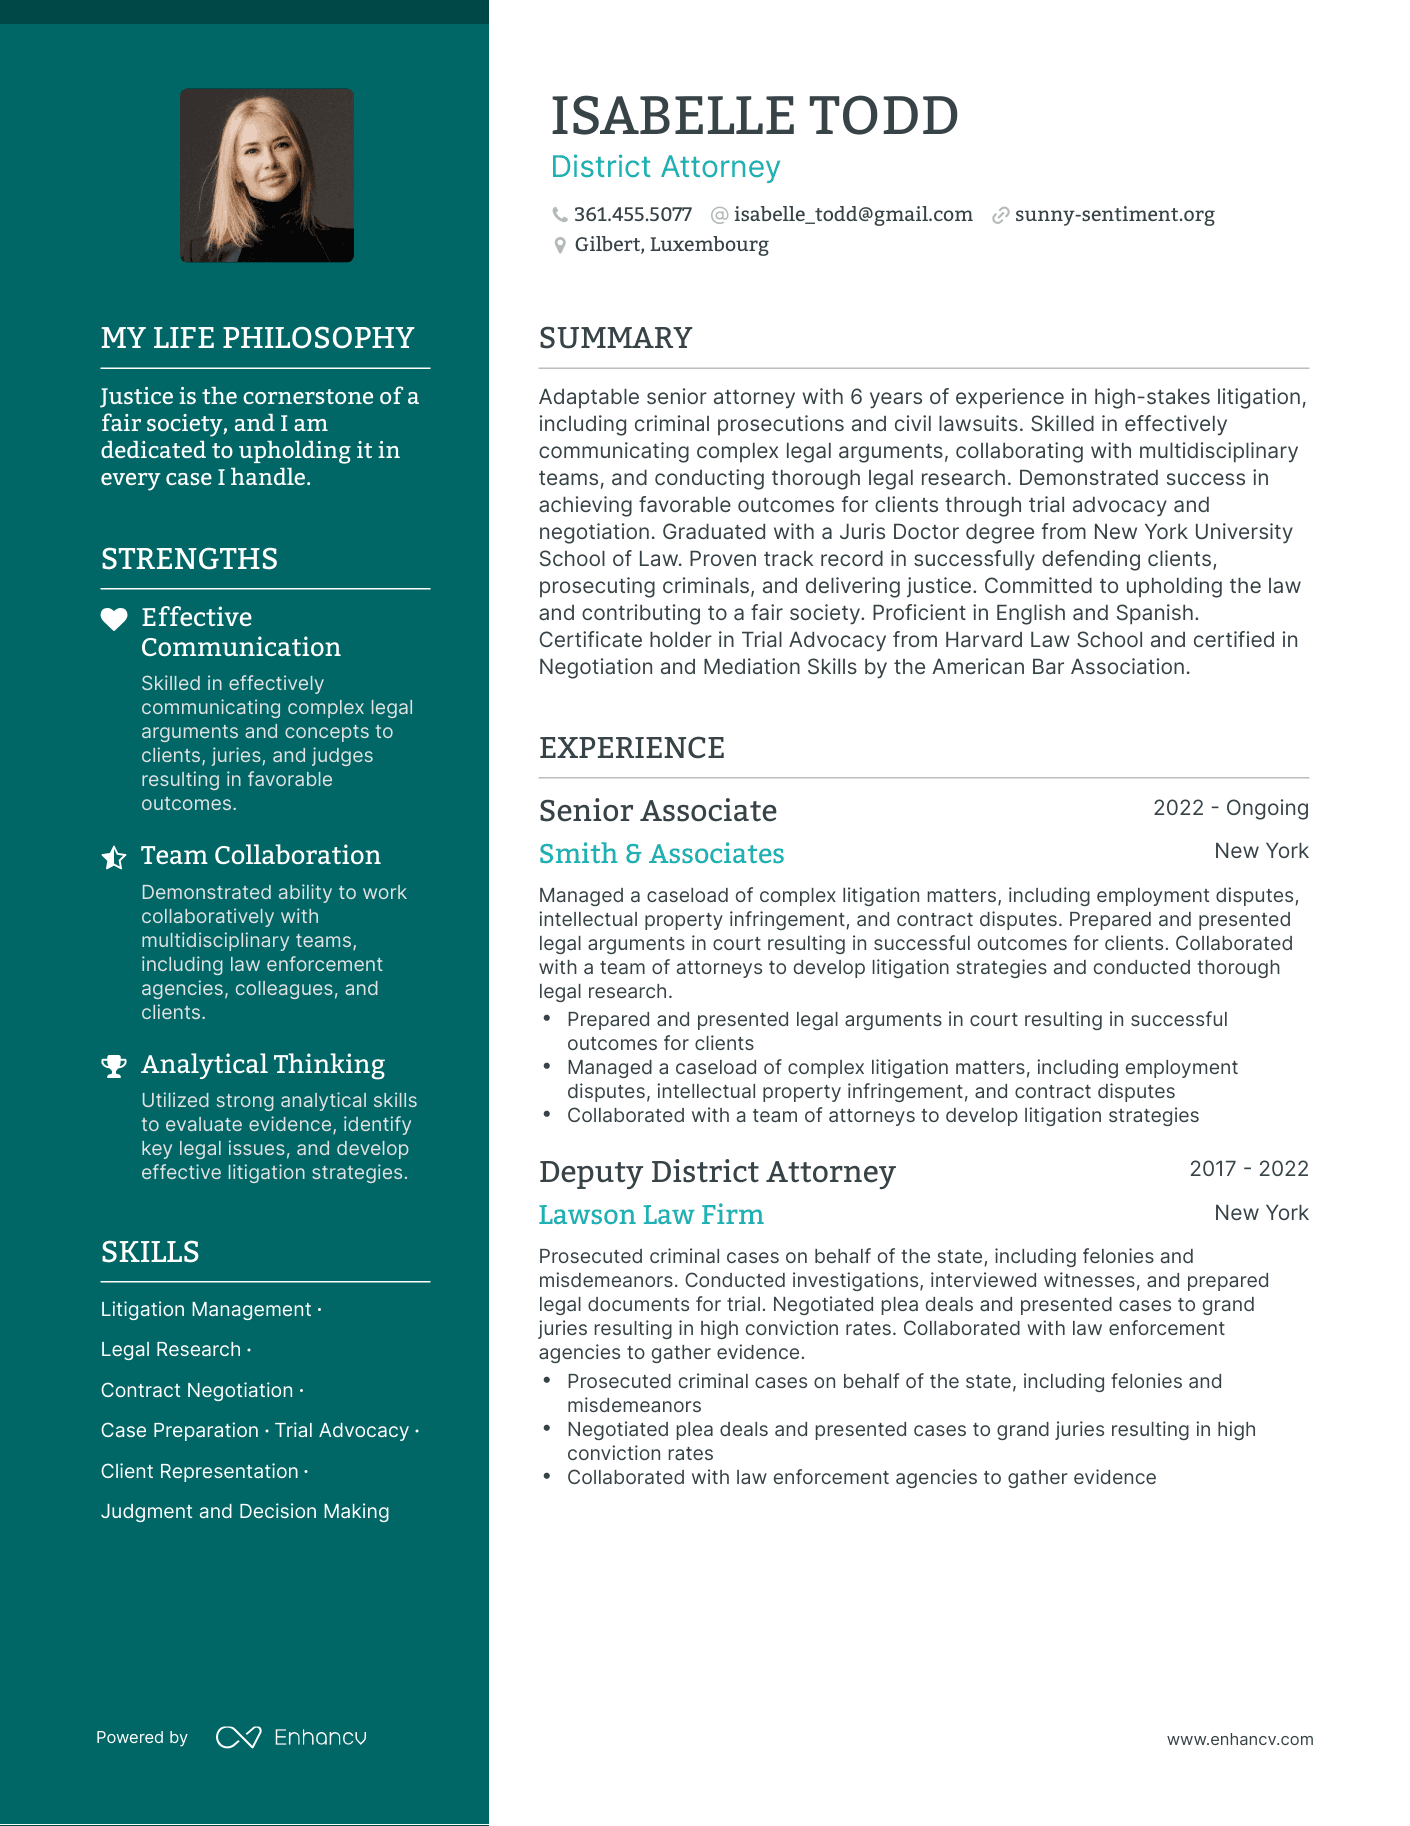 District Attorney resume example